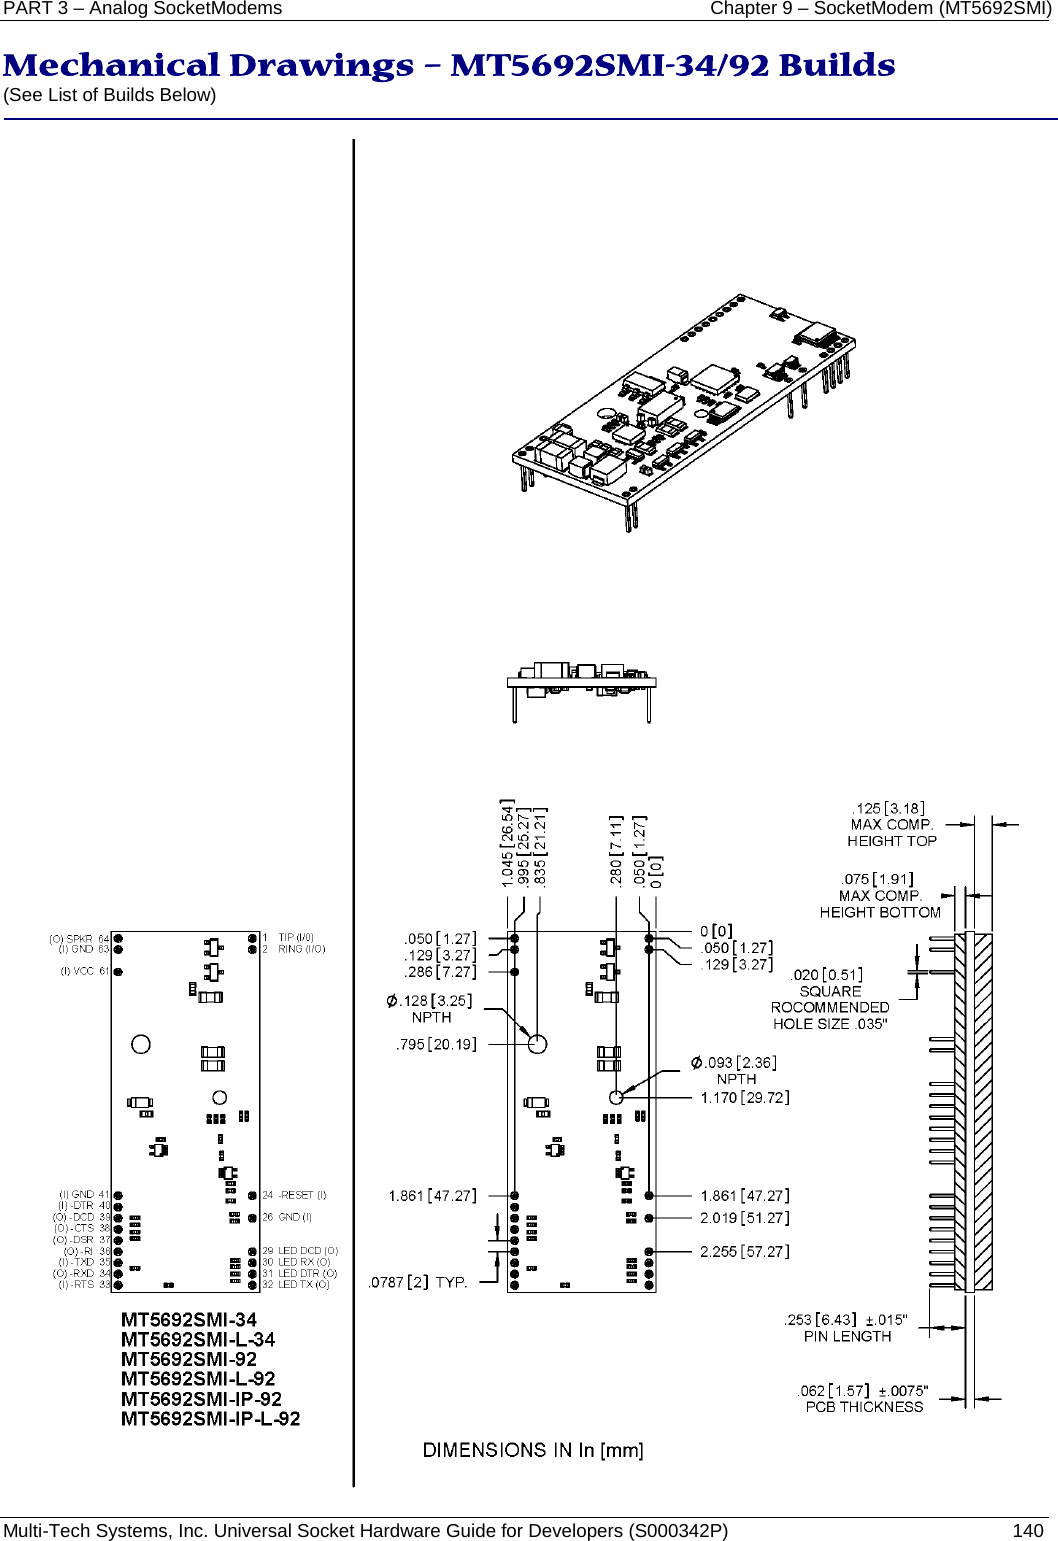 PART 3 – Analog SocketModems    Chapter 9 – SocketModem (MT5692SMI) Multi-Tech Systems, Inc. Universal Socket Hardware Guide for Developers (S000342P)  140  Mechanical Drawings – MT5692SMI-34/92 Builds  (See List of Builds Below)      